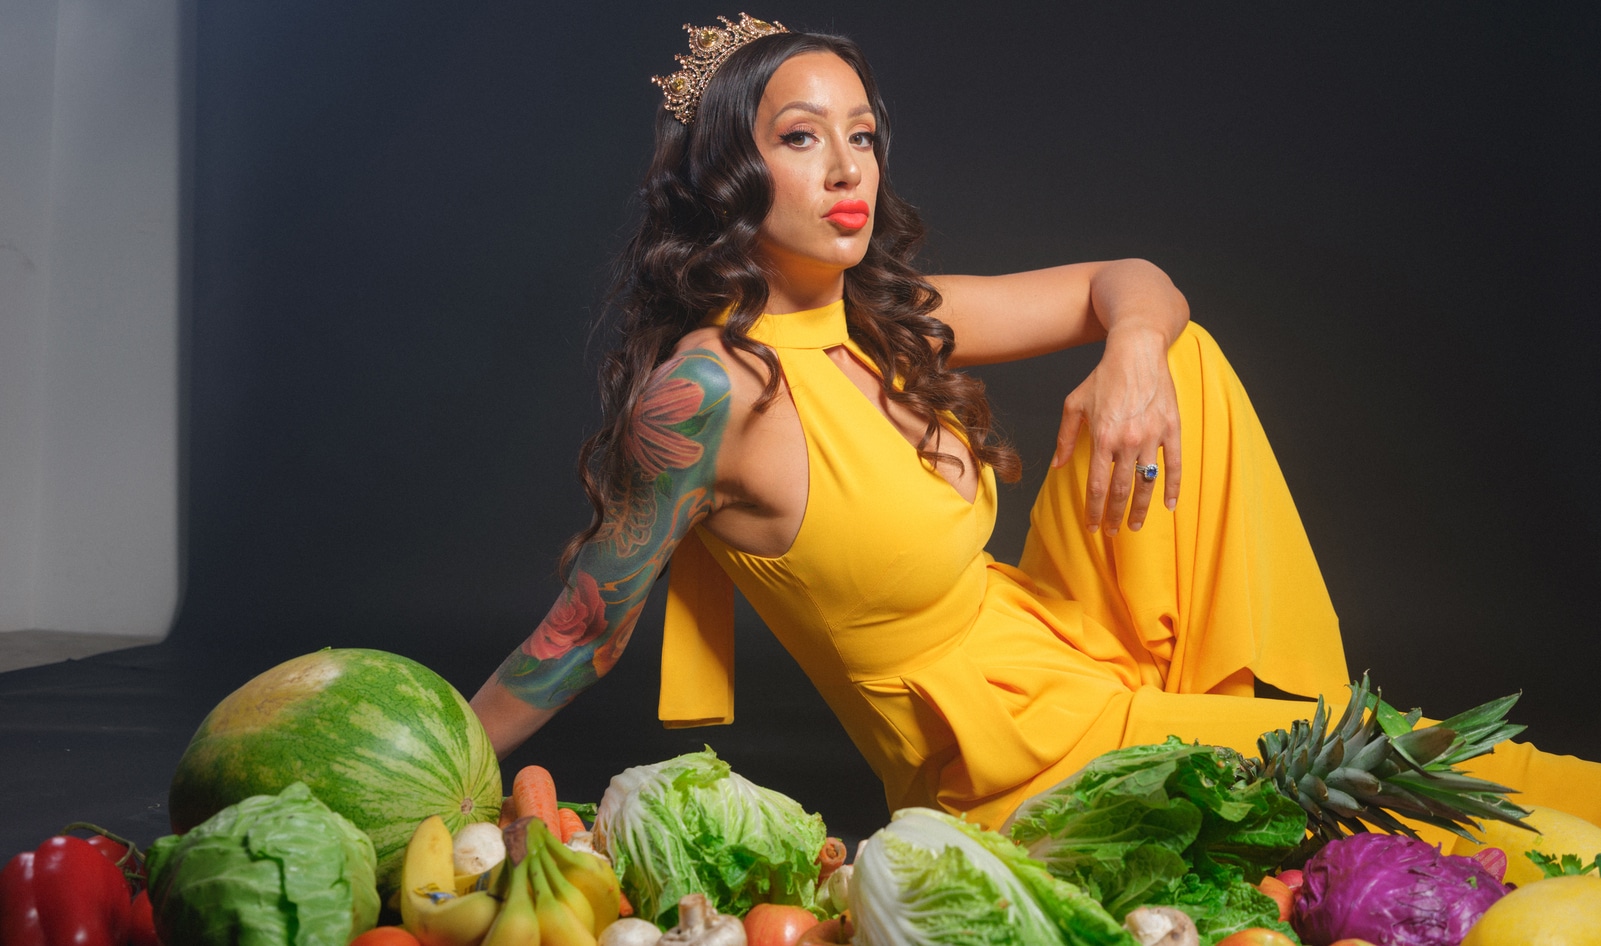 Vegan Chef's Challenge Highlights Opportunities for Women in a Male-Dominated Field